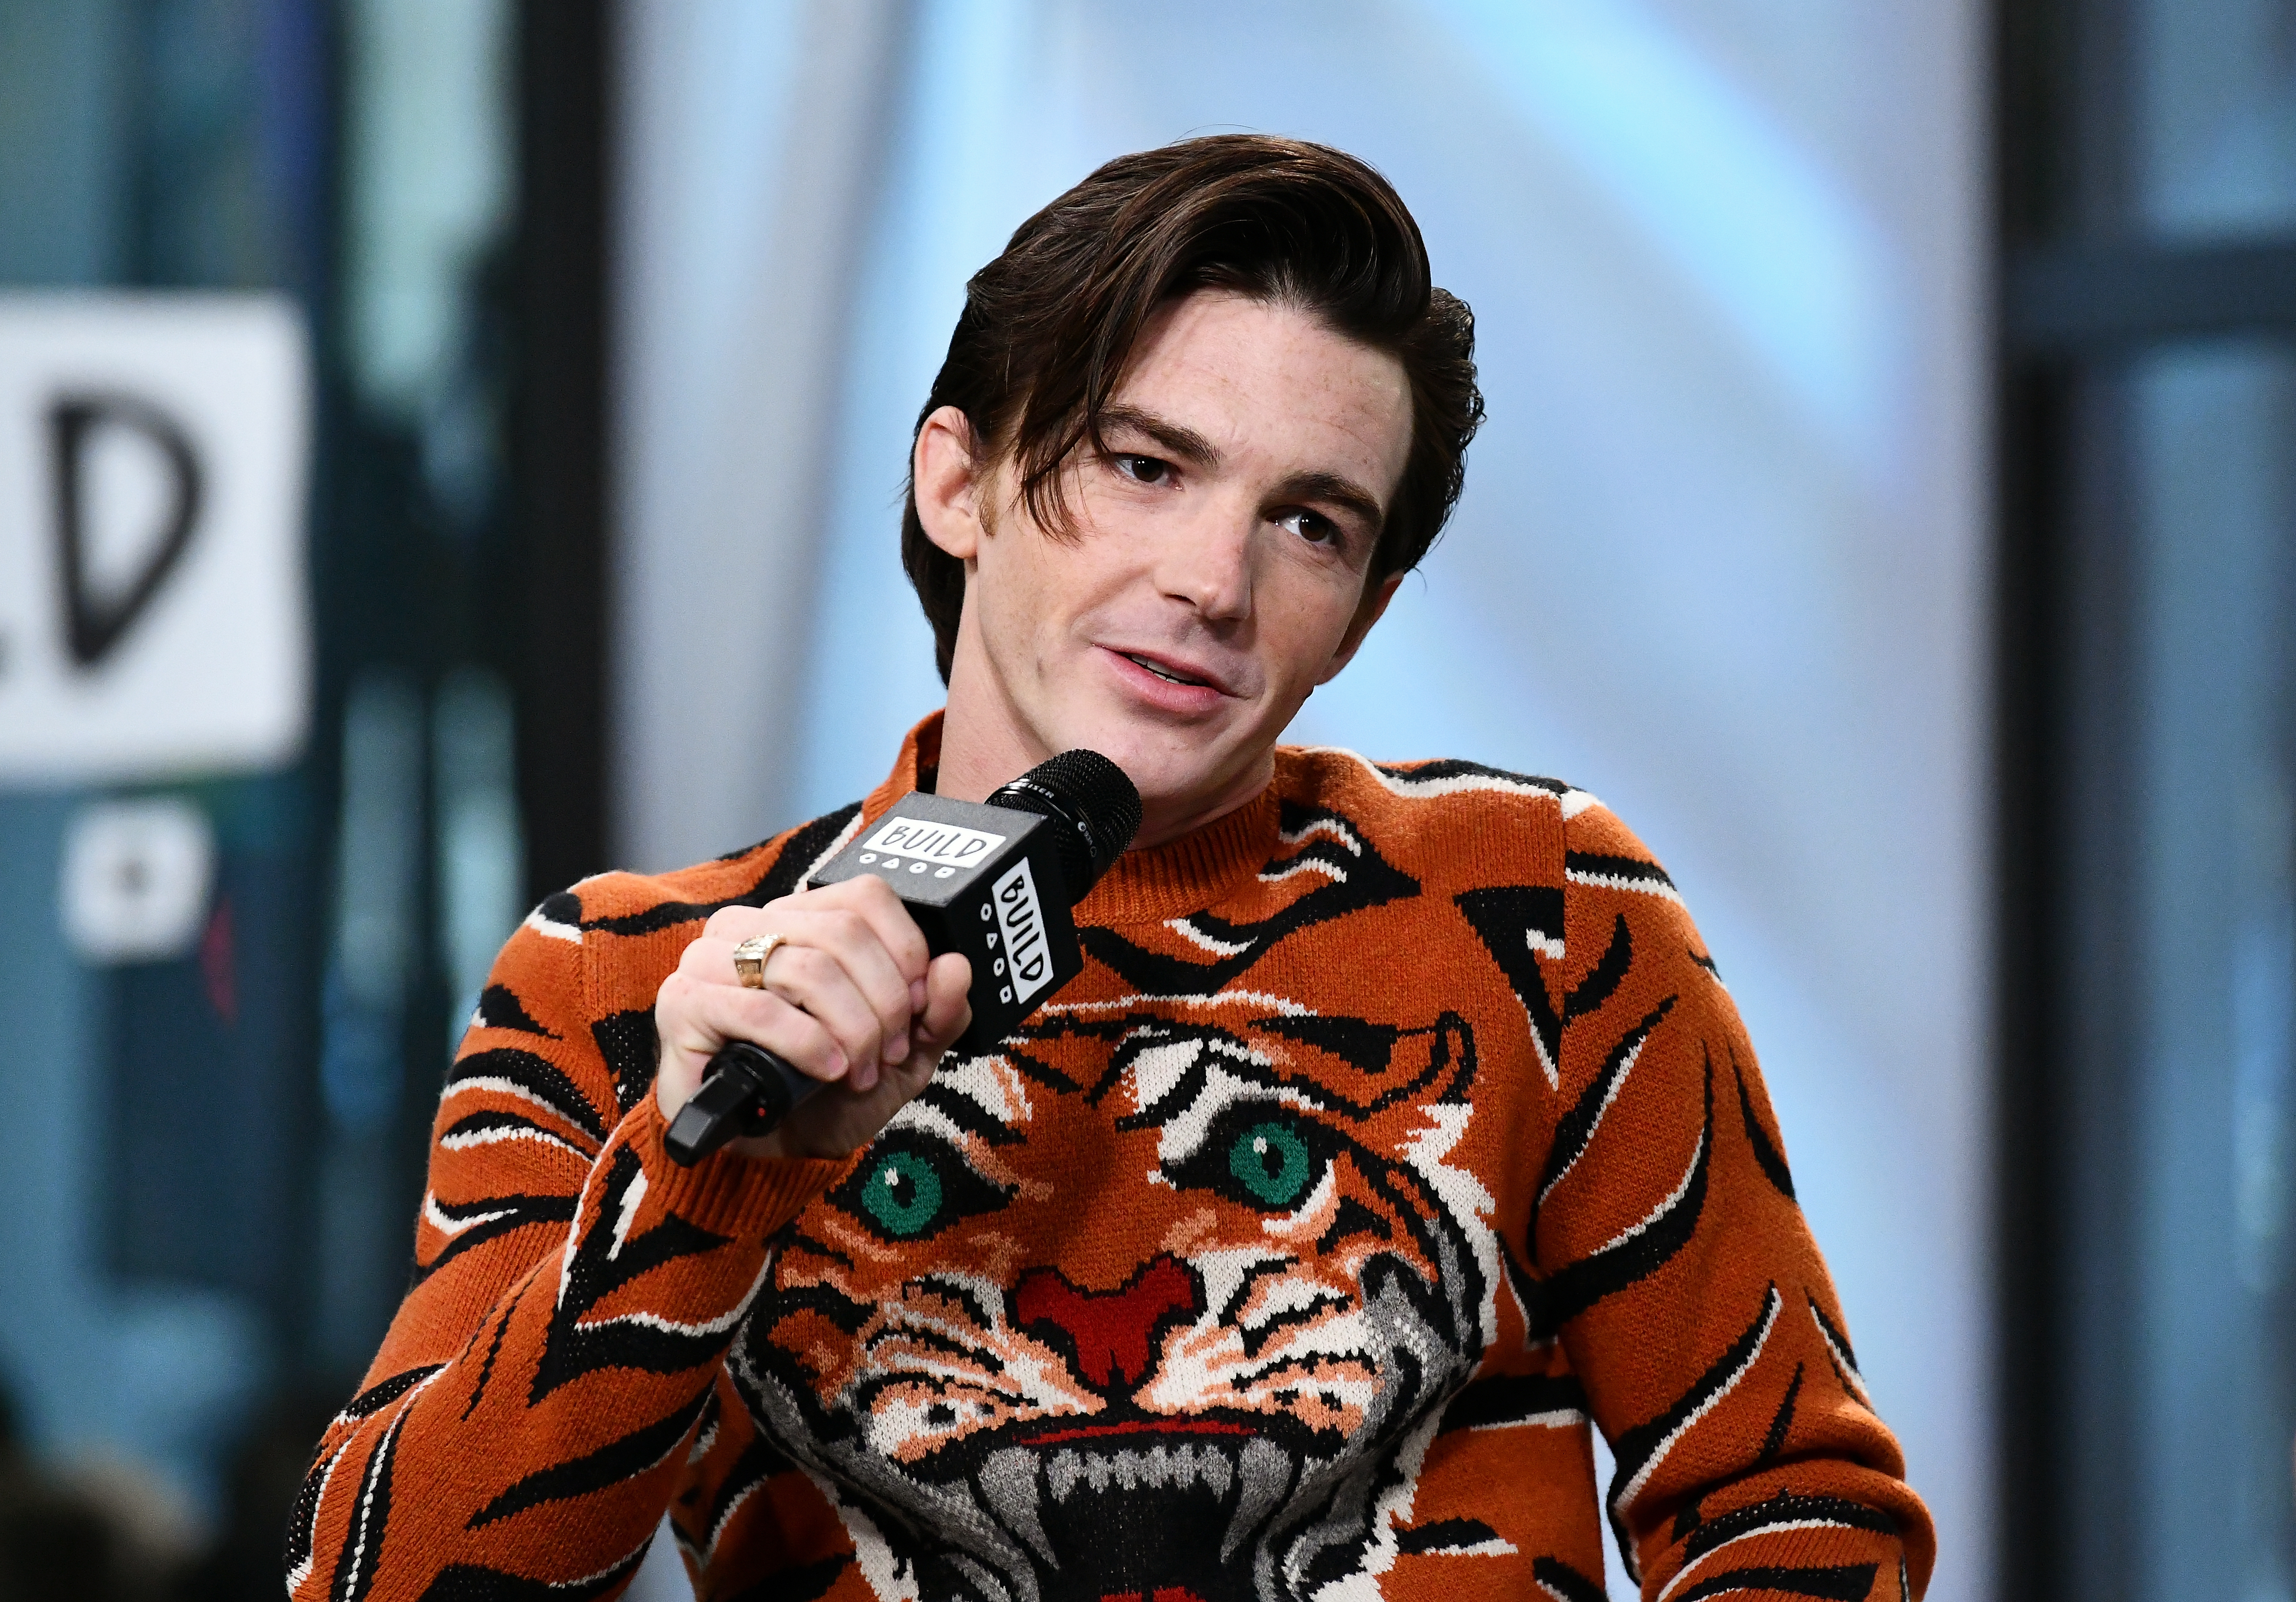 Drake Bell Was Suicidal Prior To Disappearing, Family & Police Claim